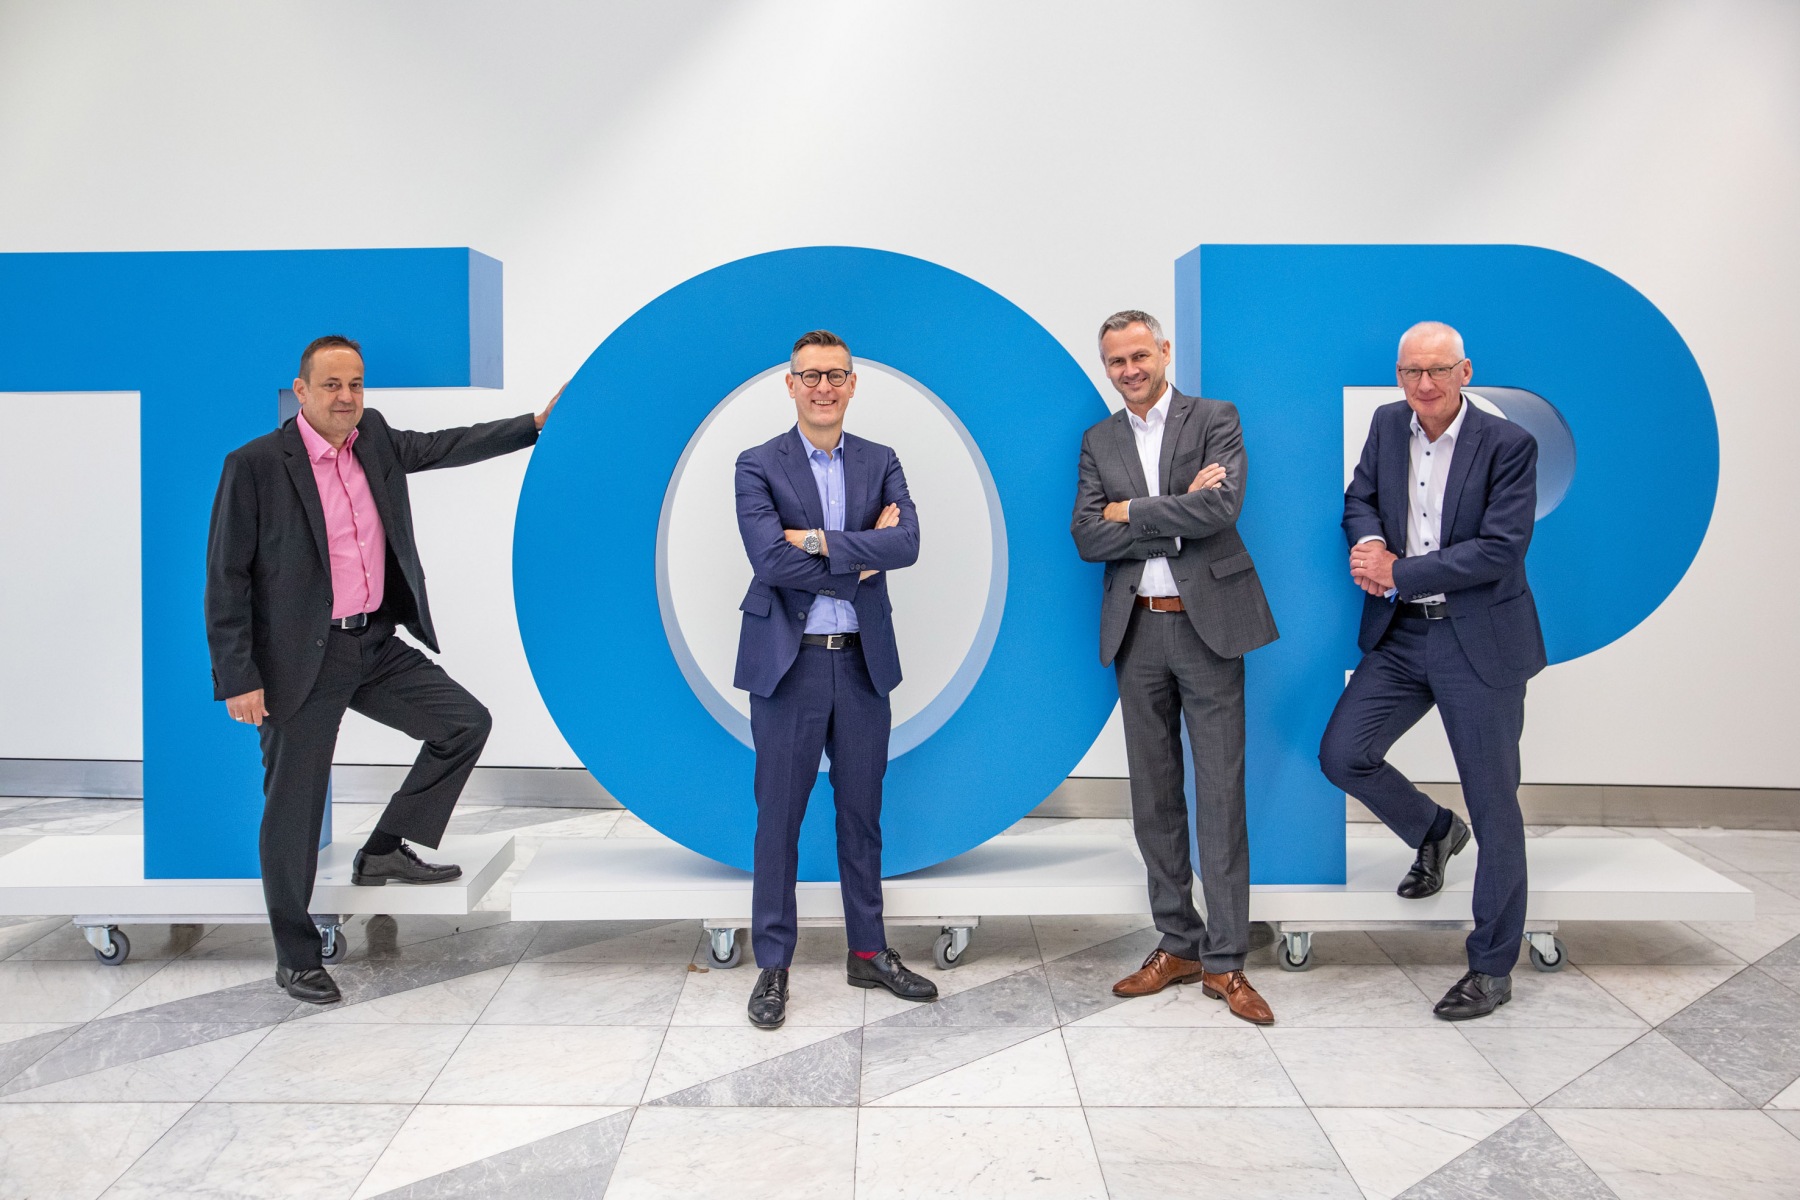 Das Ingram Micro Management auf der TOP 2019 (v.l.n.r.): Wolfgang Jung (Executive Director Core Solutions), Alexander Maier (Vice President and Chief Country Executive Germany), Thomas Groß (Executive Director Advanced Solutions), Klaus Donath (Executive Director Sales & Business Enablement)